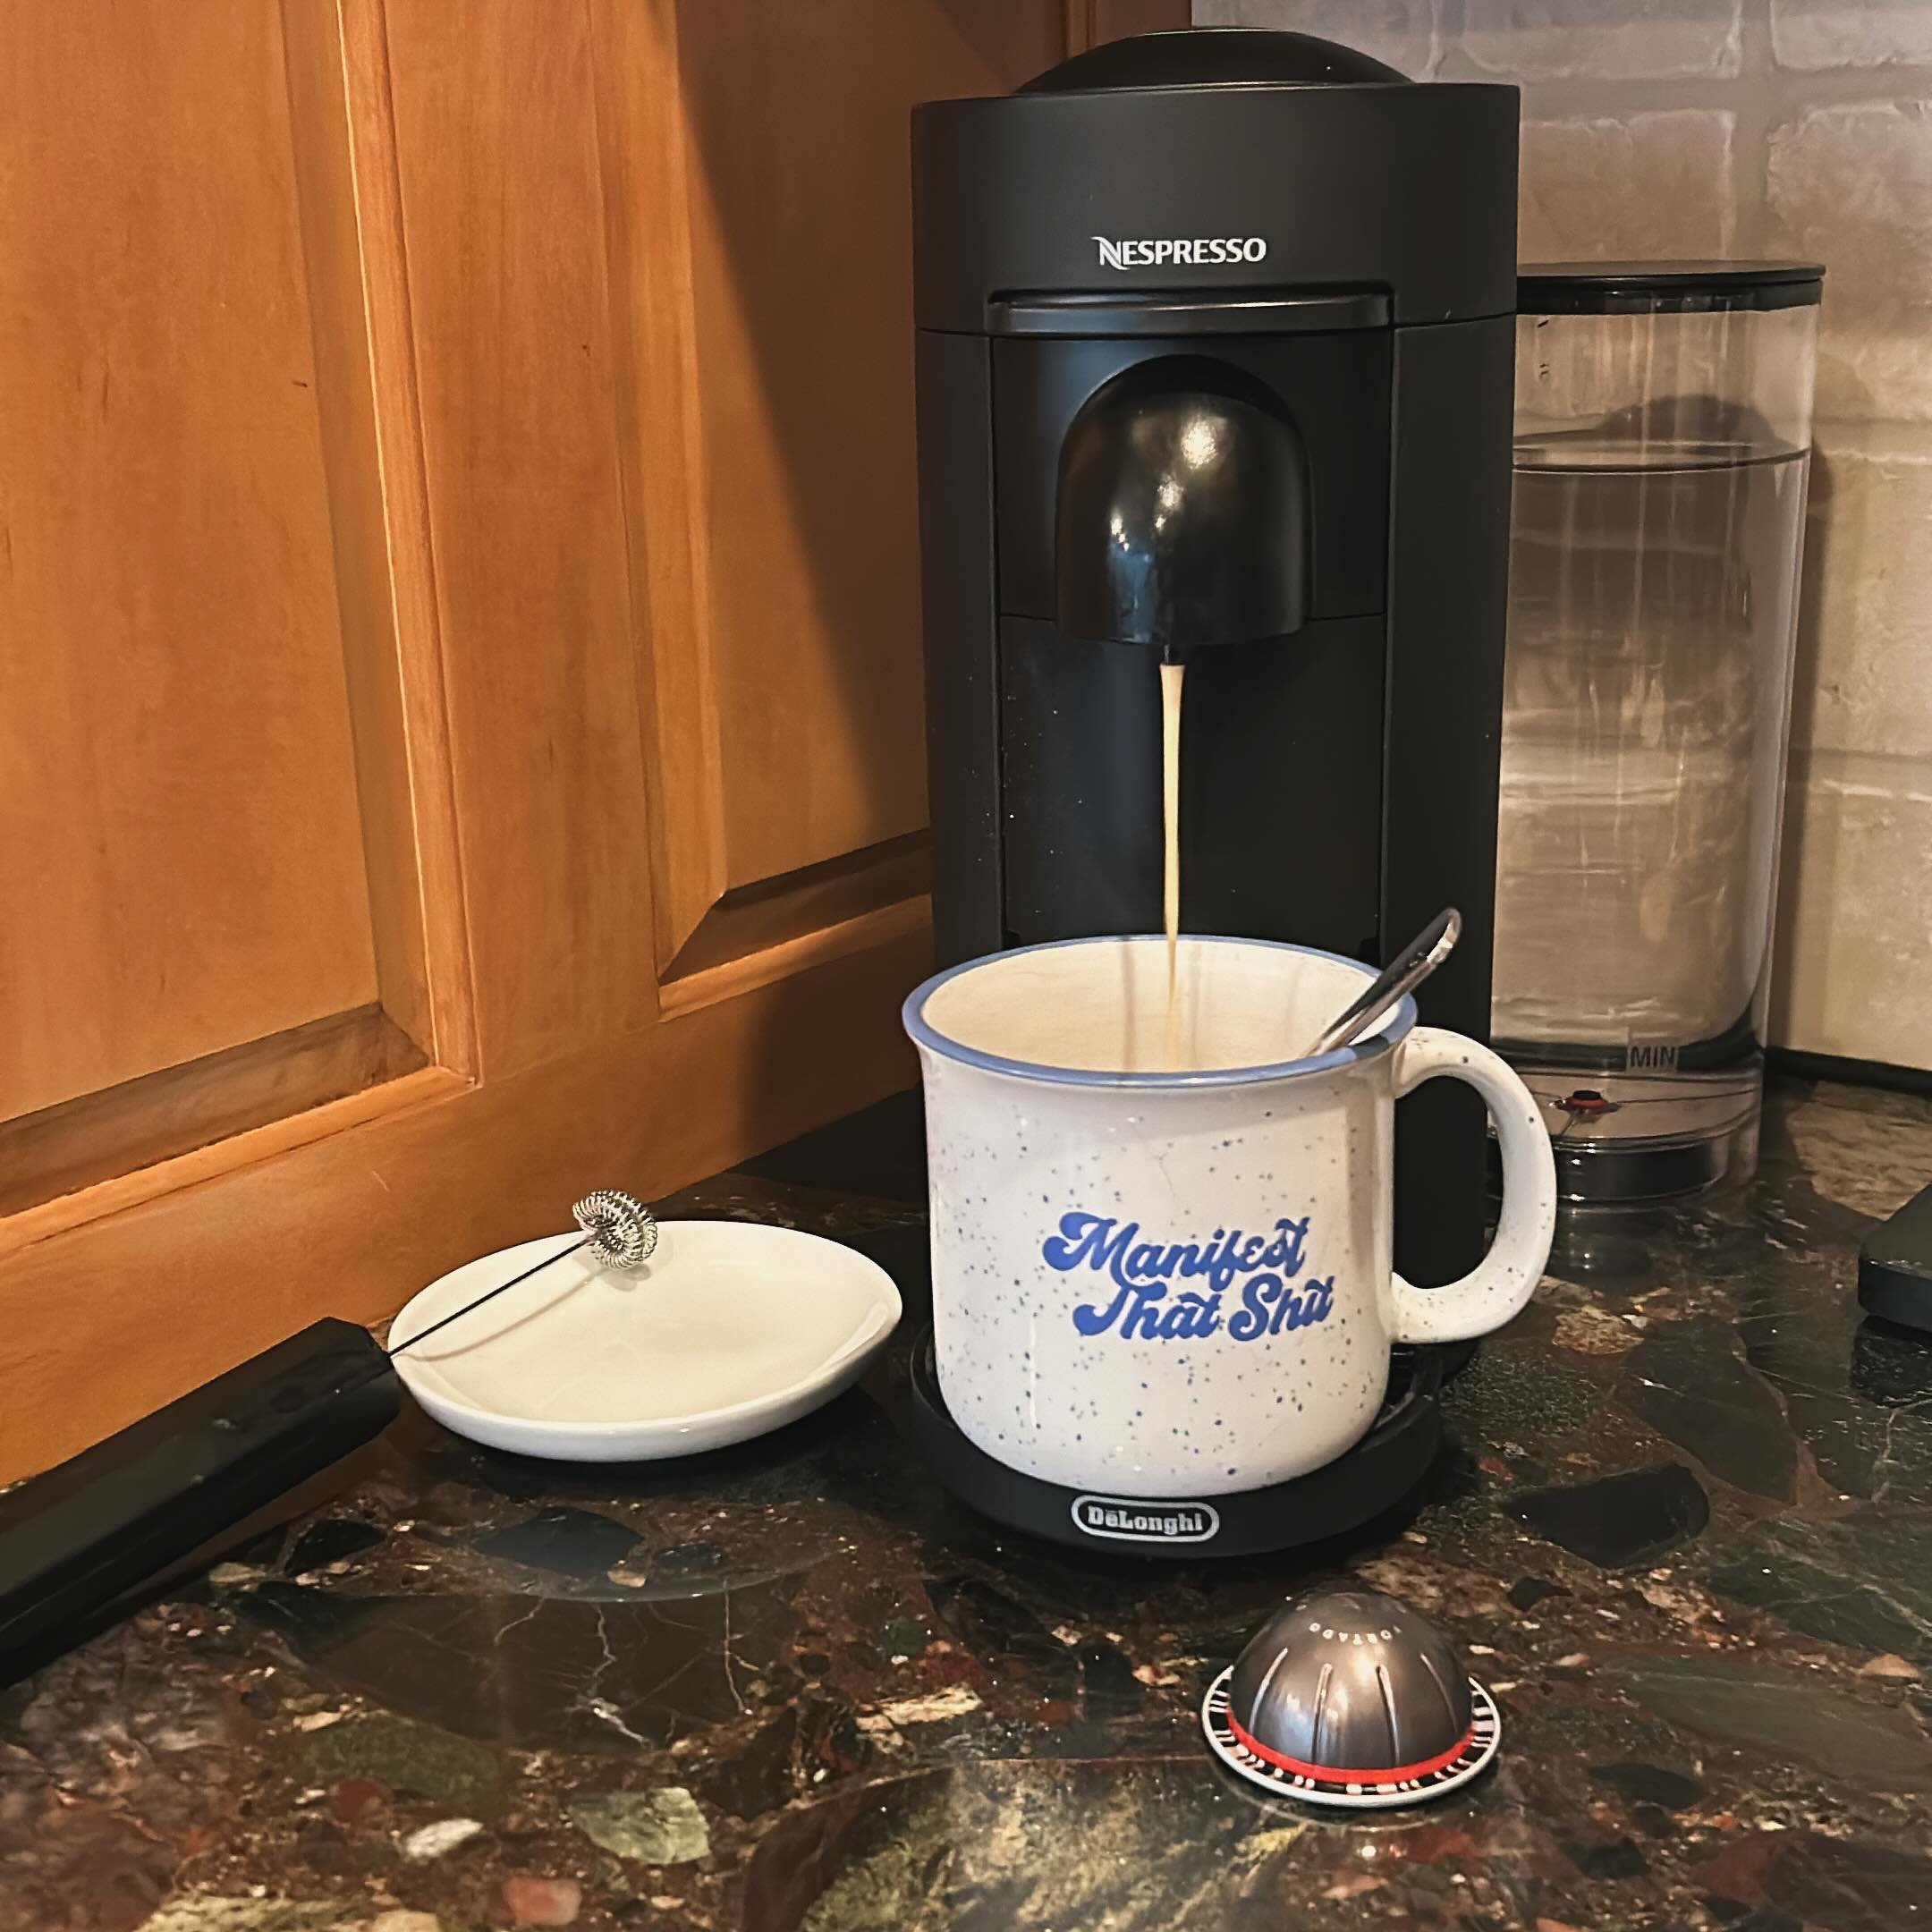 I adore my @nespressousa machine! And I loved my @nespresso coffee. That&rsquo;s right. I LOVED it - passed tense. 
I recently have been drinking #decaf only. Nespresso needs more and better flavor options for us decaf drinkers who want that gorgeous